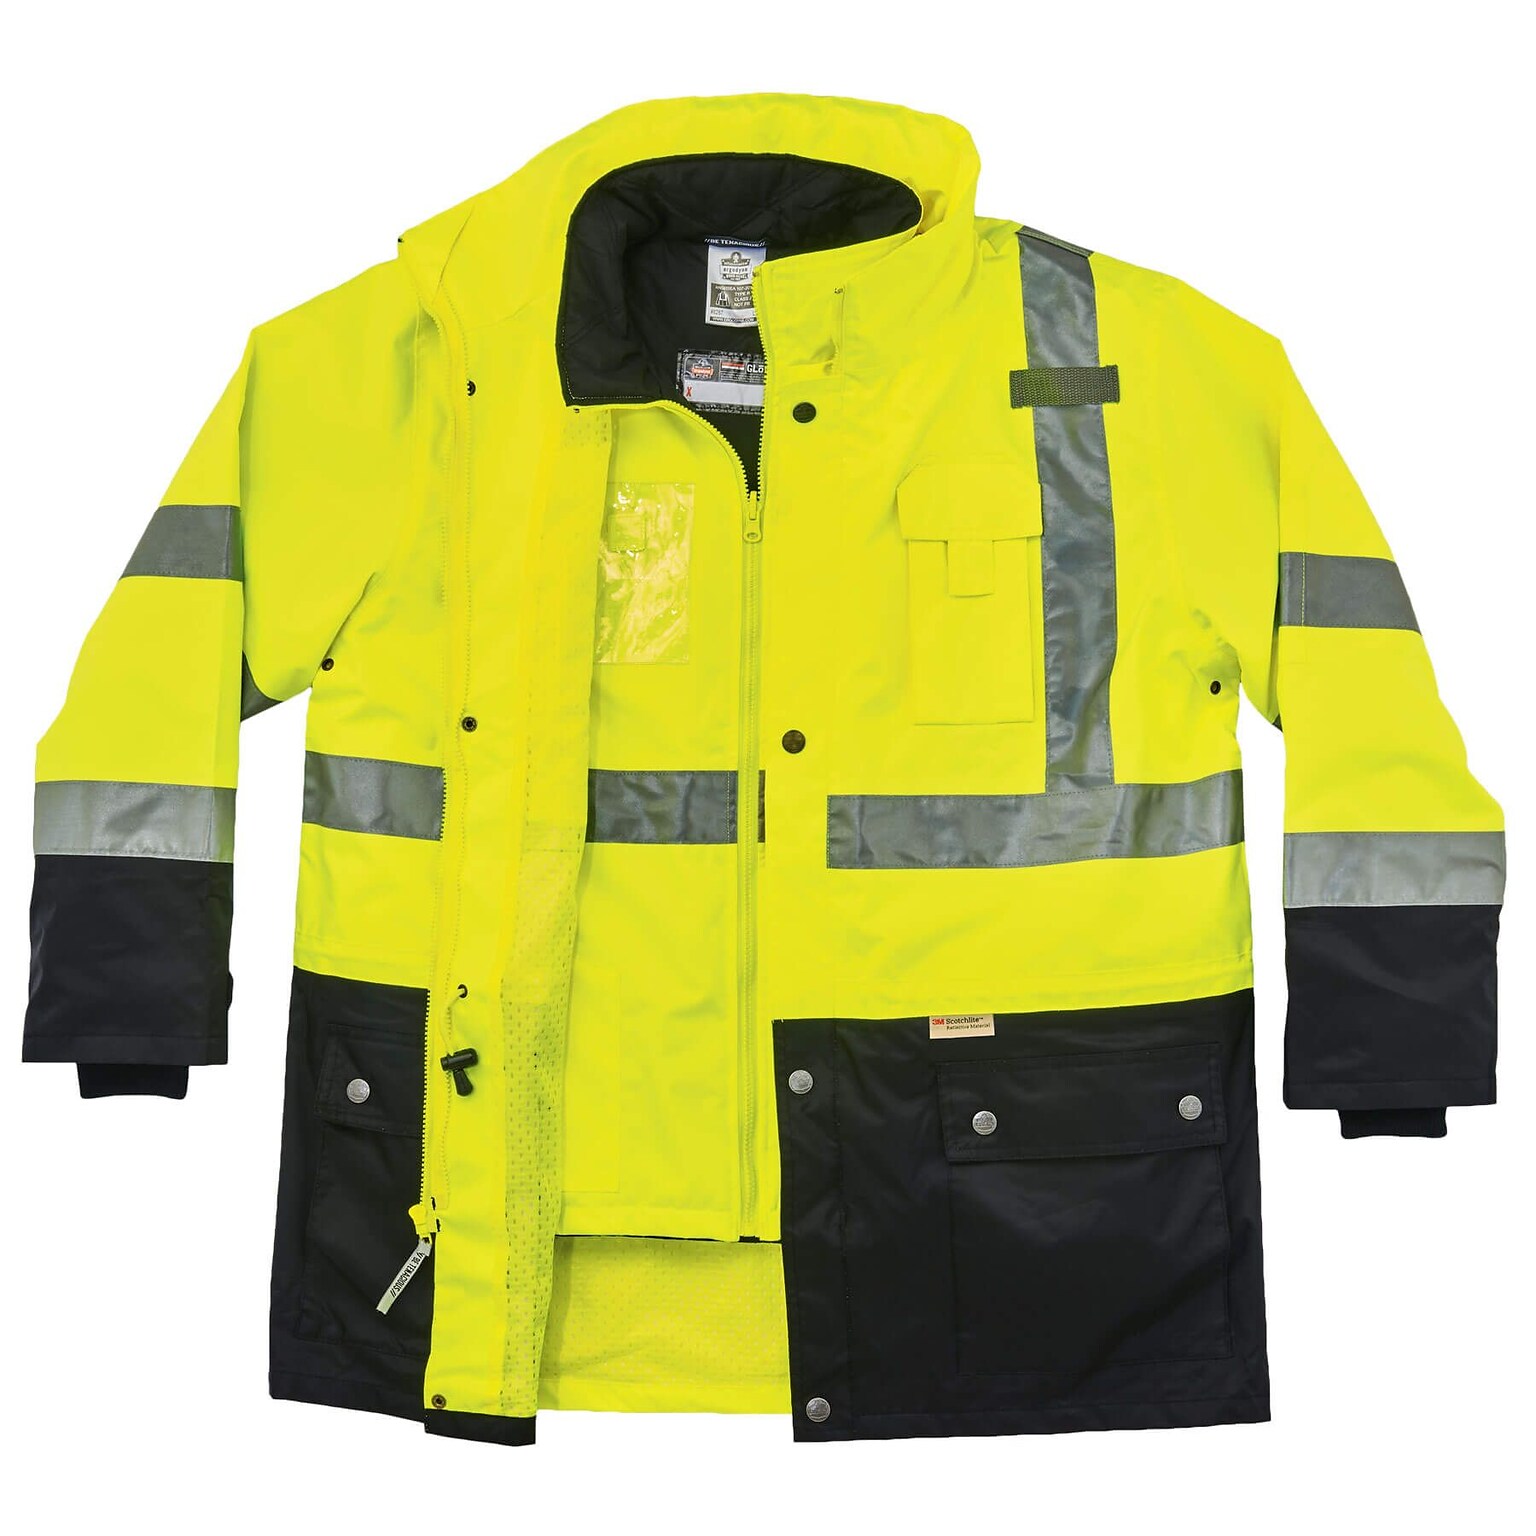 GloWear 8388 Type R Class 3/2 Thermal Jacket Kit, Lime, Extra Large (25535)